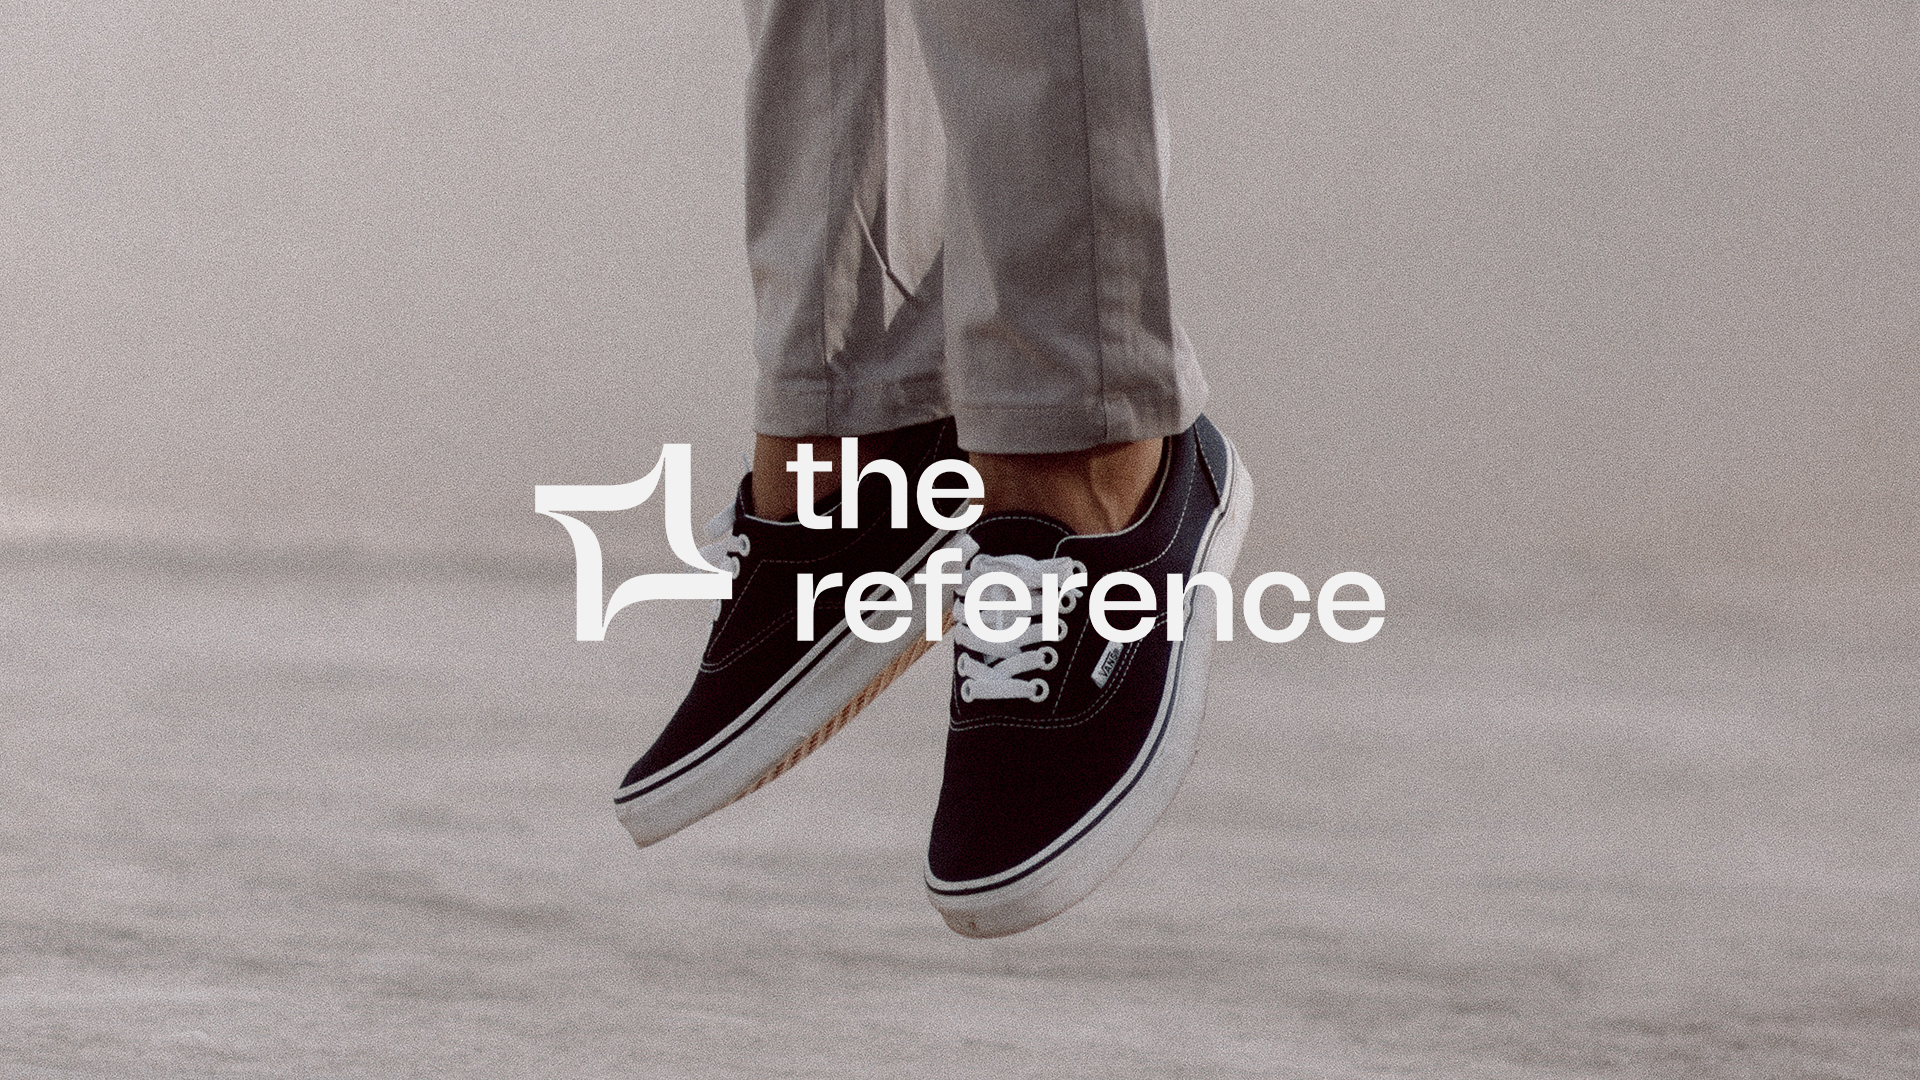 Rebranding The Reference: how we shaped our new brand